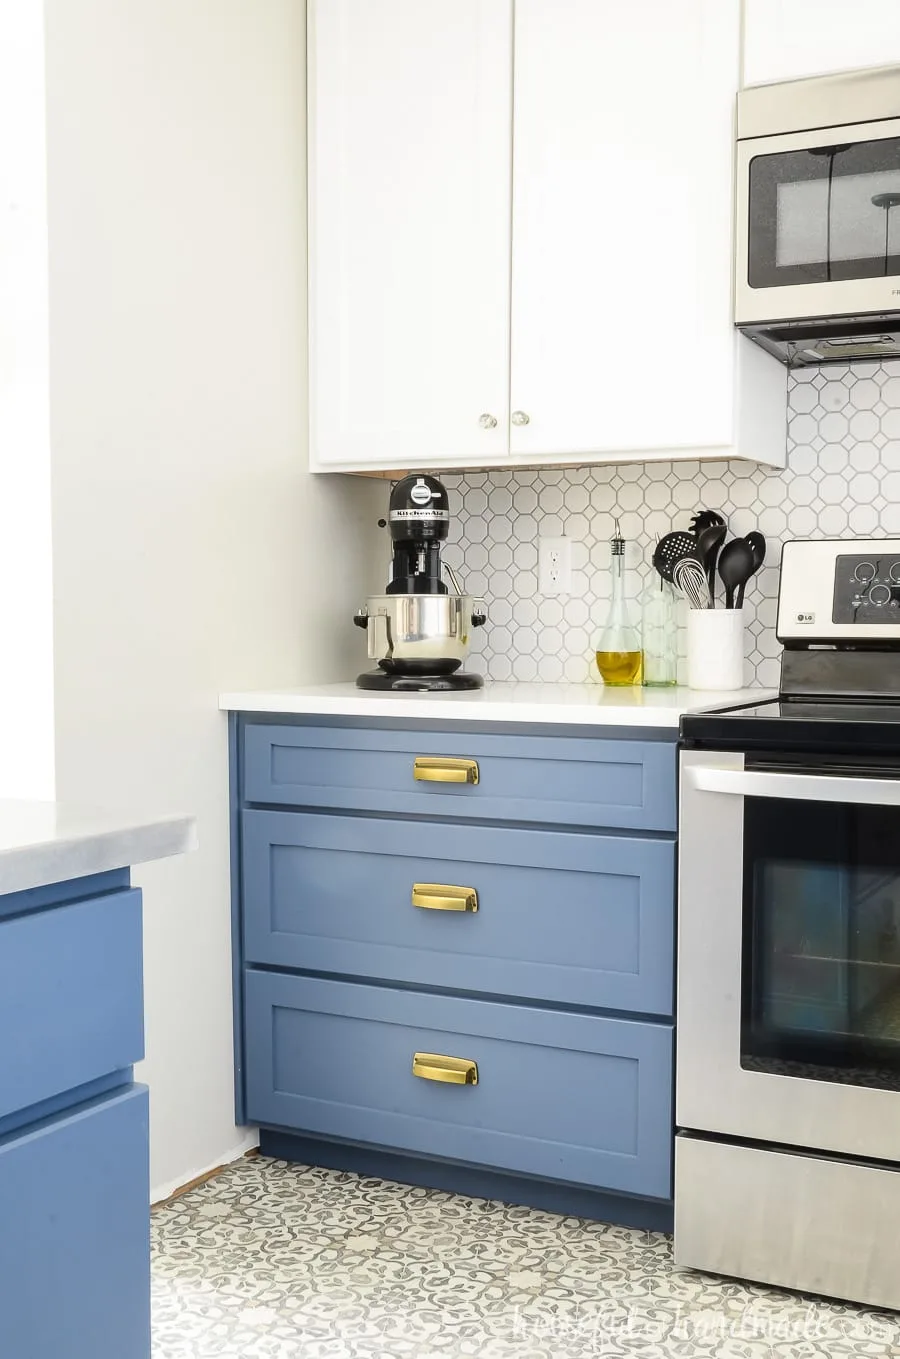 Blue painted drawer base cabinet with 3 drawers next to the stove with white upper cabinets, tile backsplash and countertop.